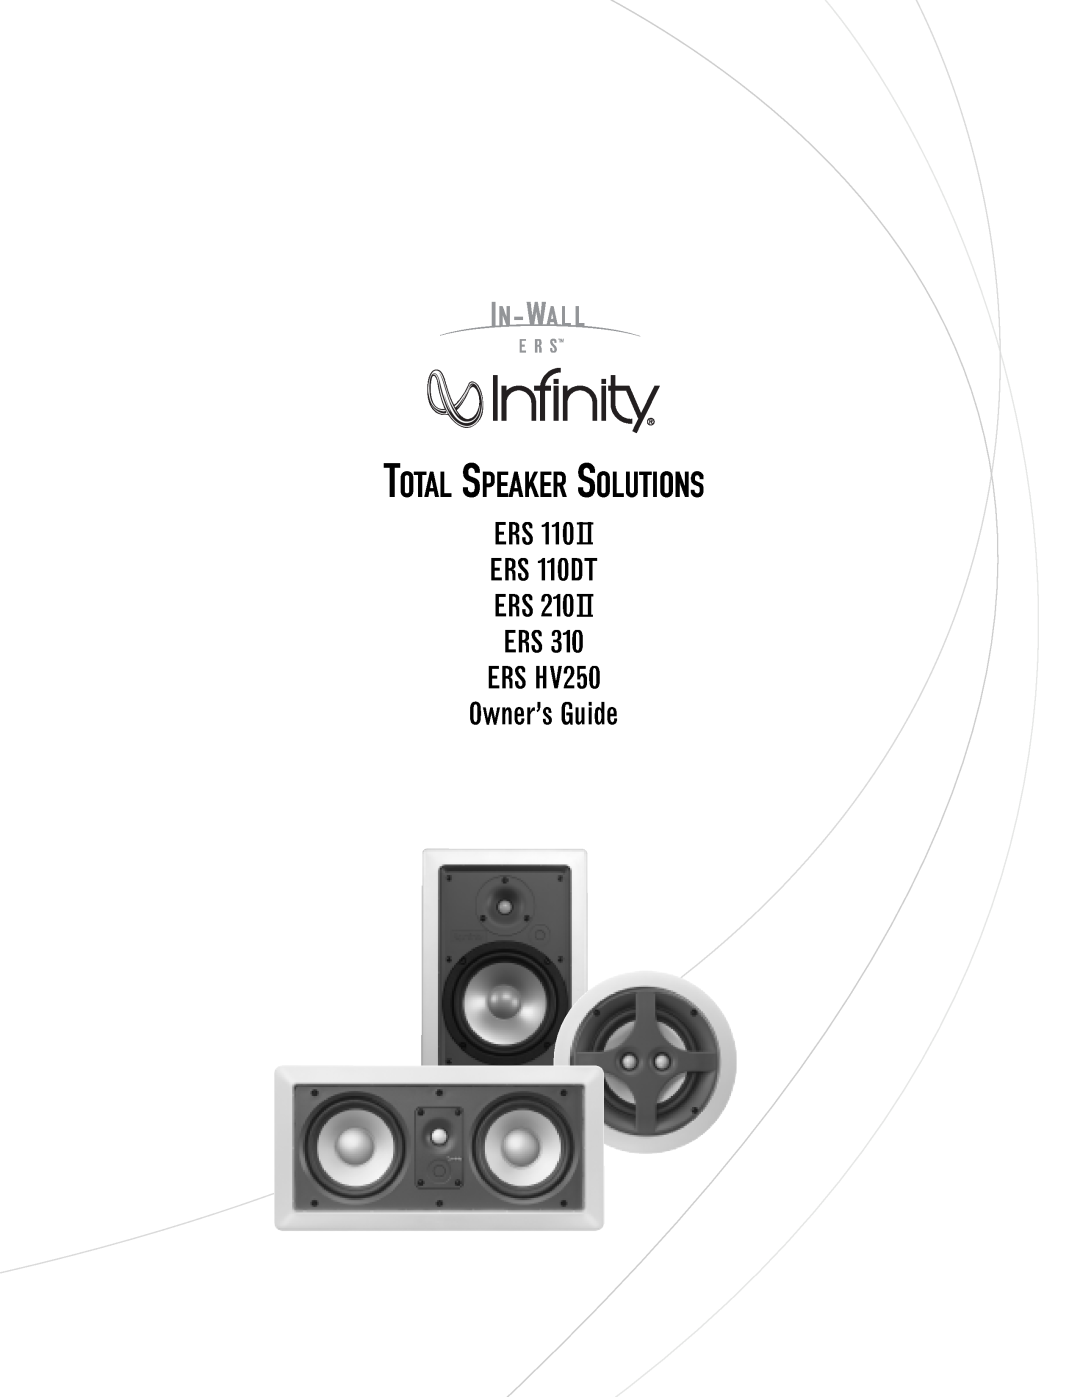 Infinity ERS 210II, ERS 310, ERS 110II manual Total Speaker Solutions, ERS ERS 110DT ERS ERS ERS HV250 Owner’s Guide 